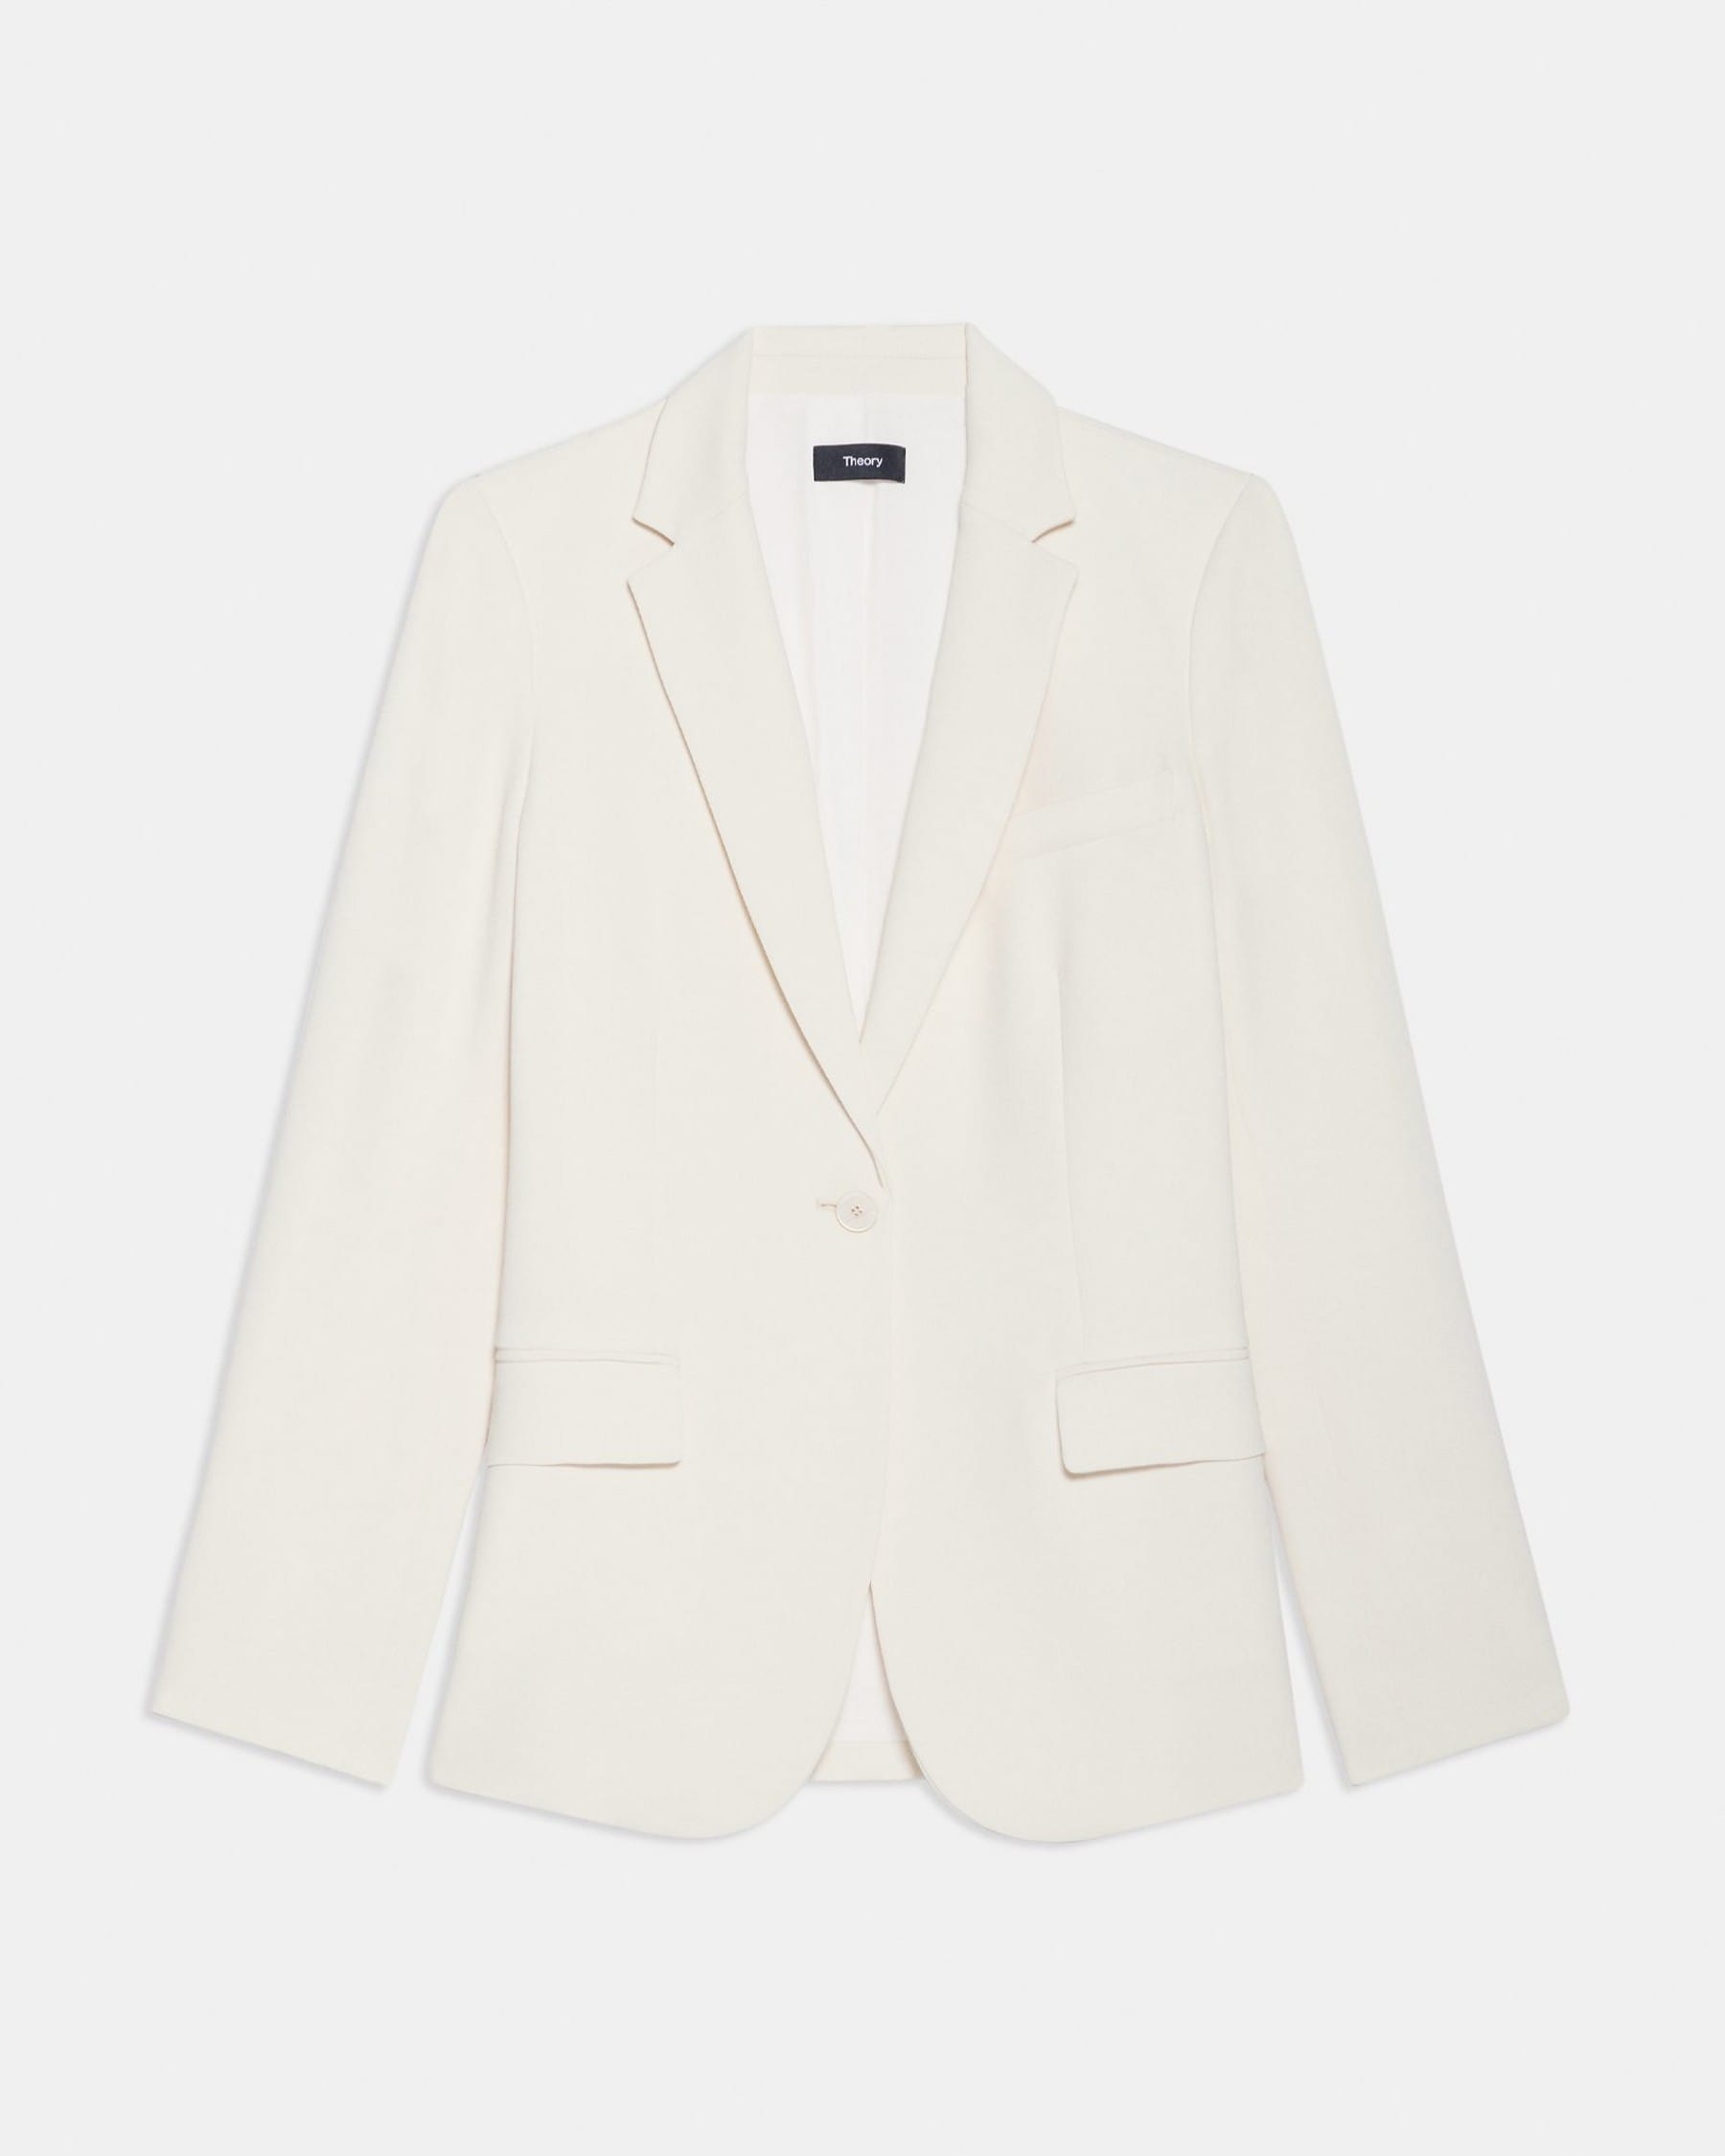 Theory + Staple Blazer in Admiral Crepe